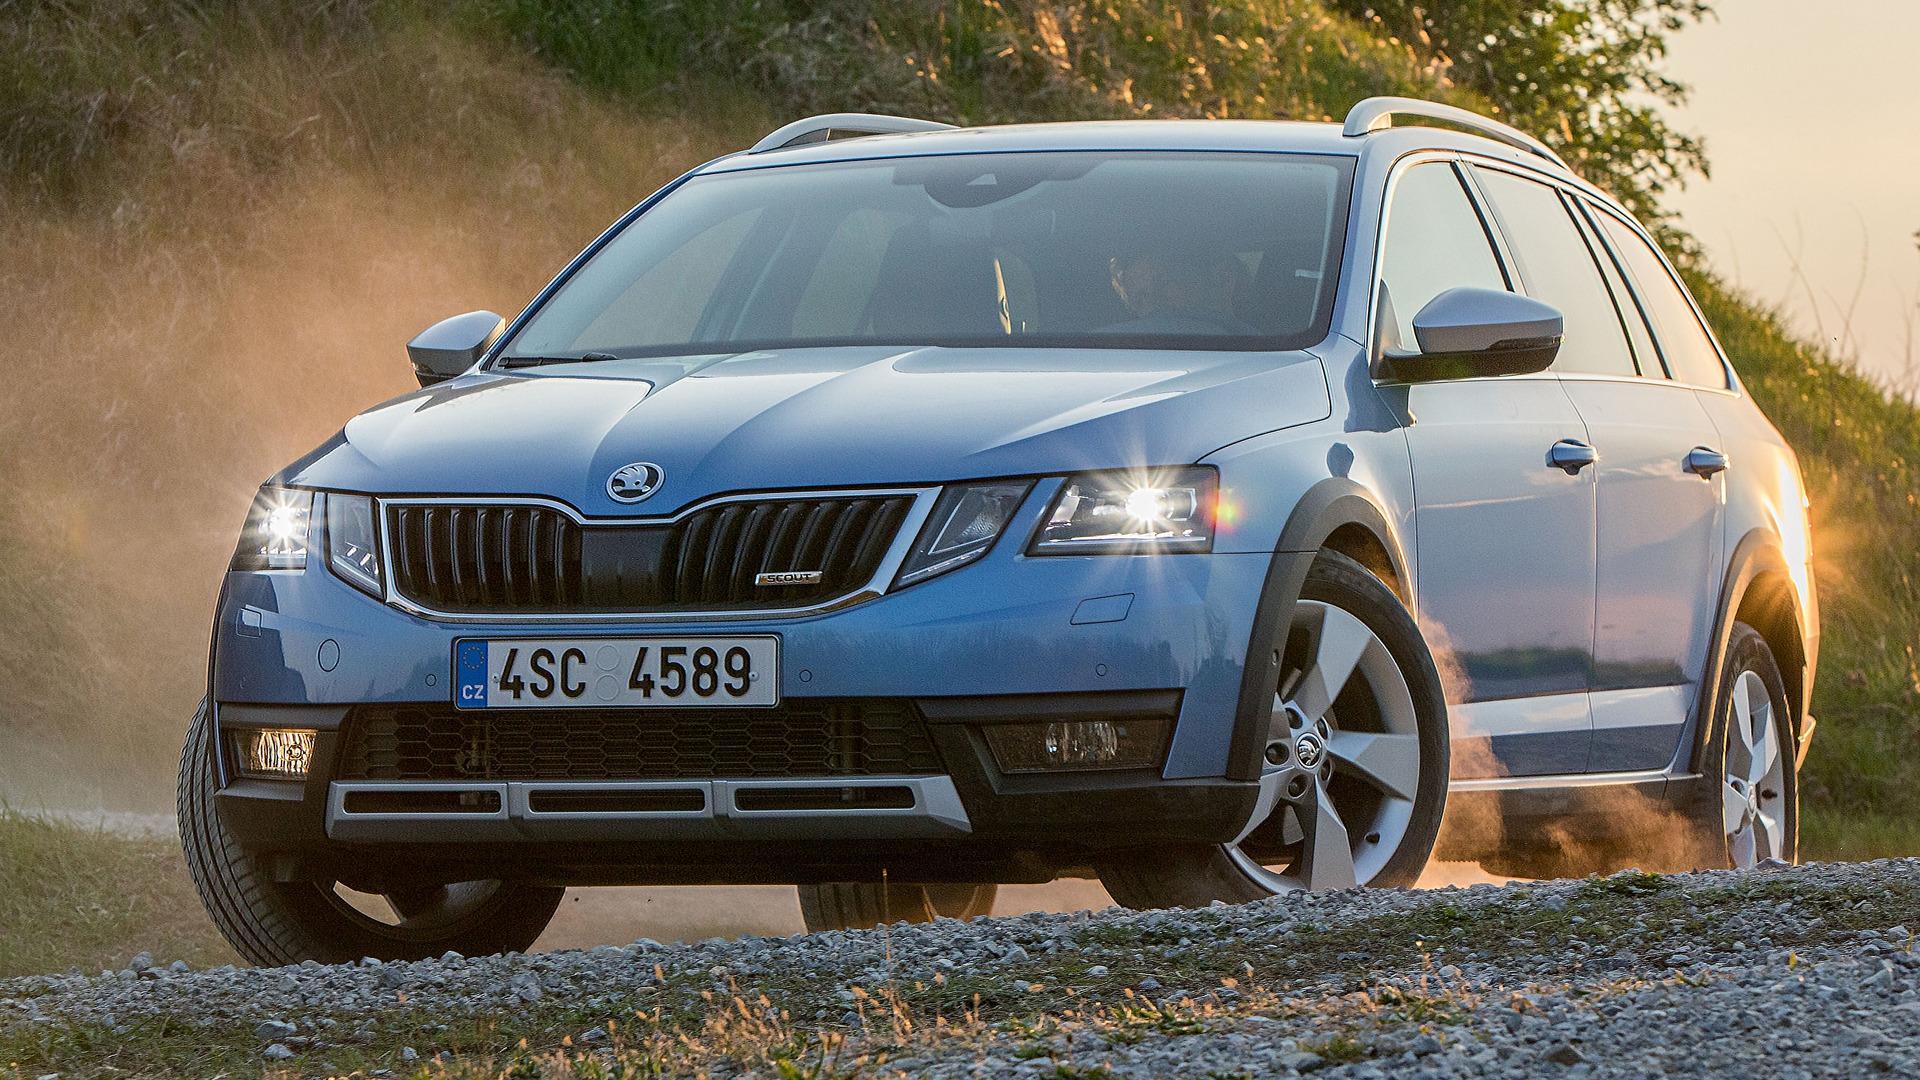 Skoda Says New Octavia Will Be State Of